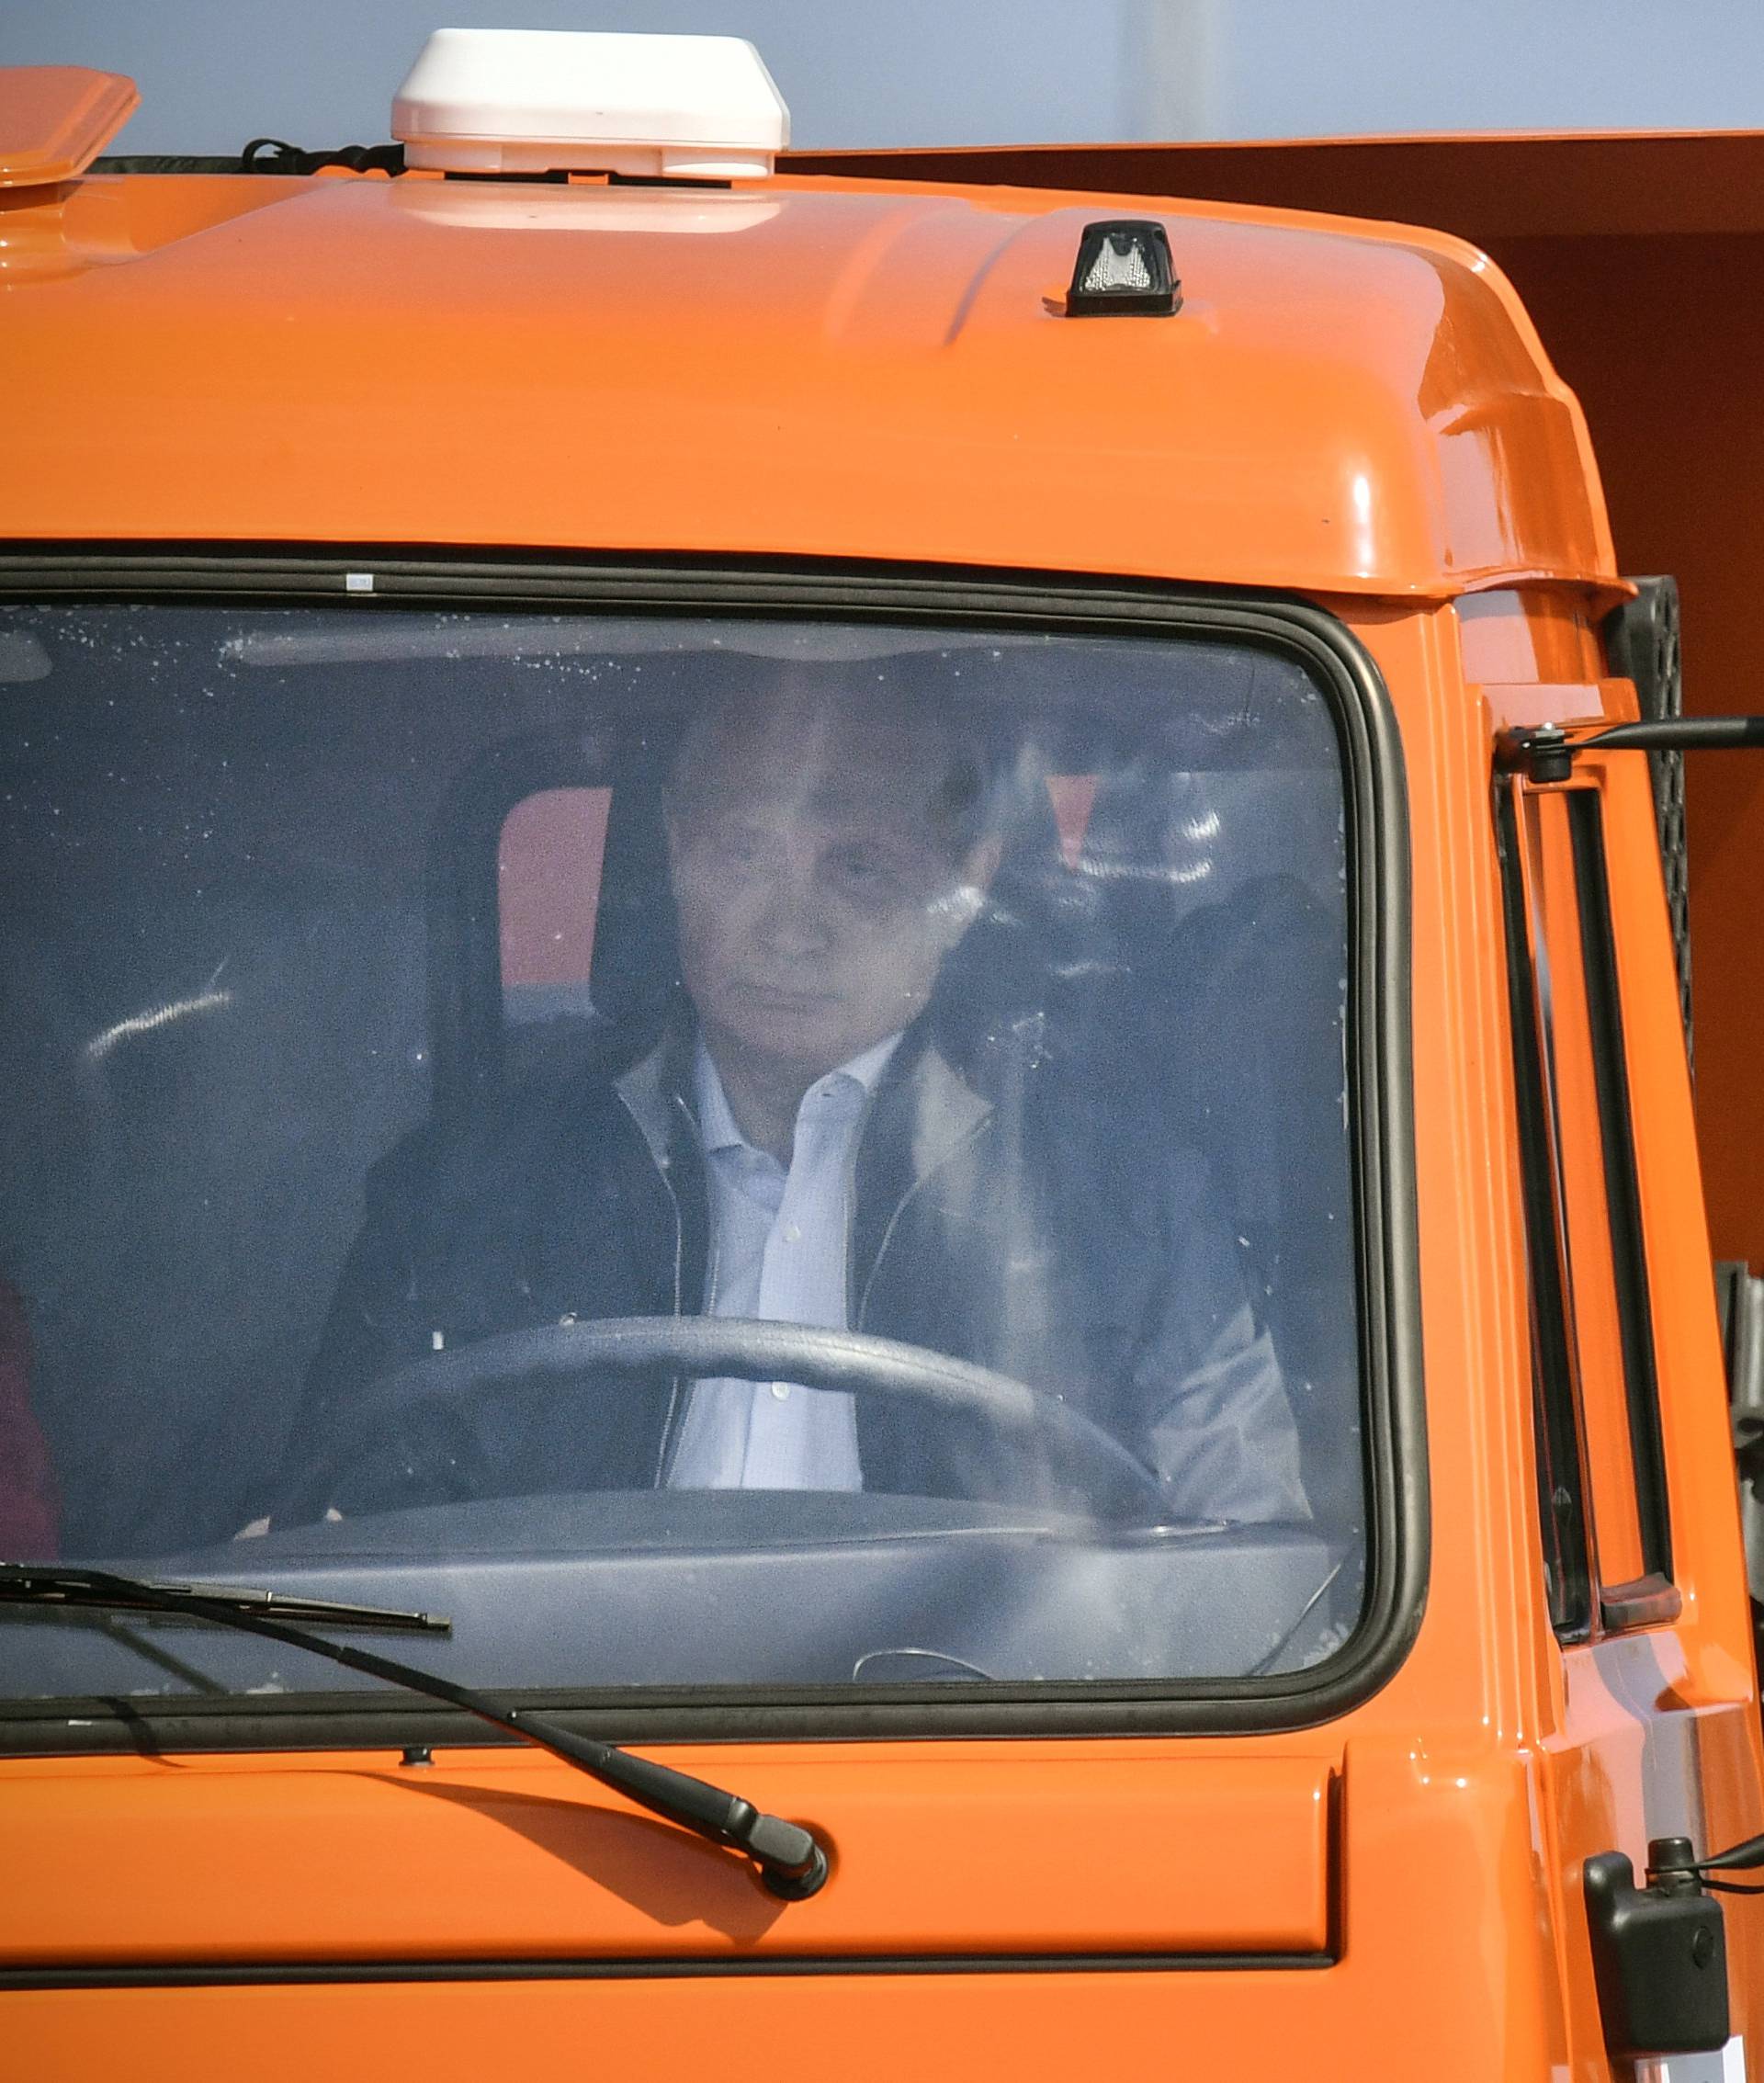 Russian President Putin drives a Kamaz truck during a ceremony opening a bridge, which was constructed to connect the Russian mainland with the Crimean Peninsula across the Kerch Strait